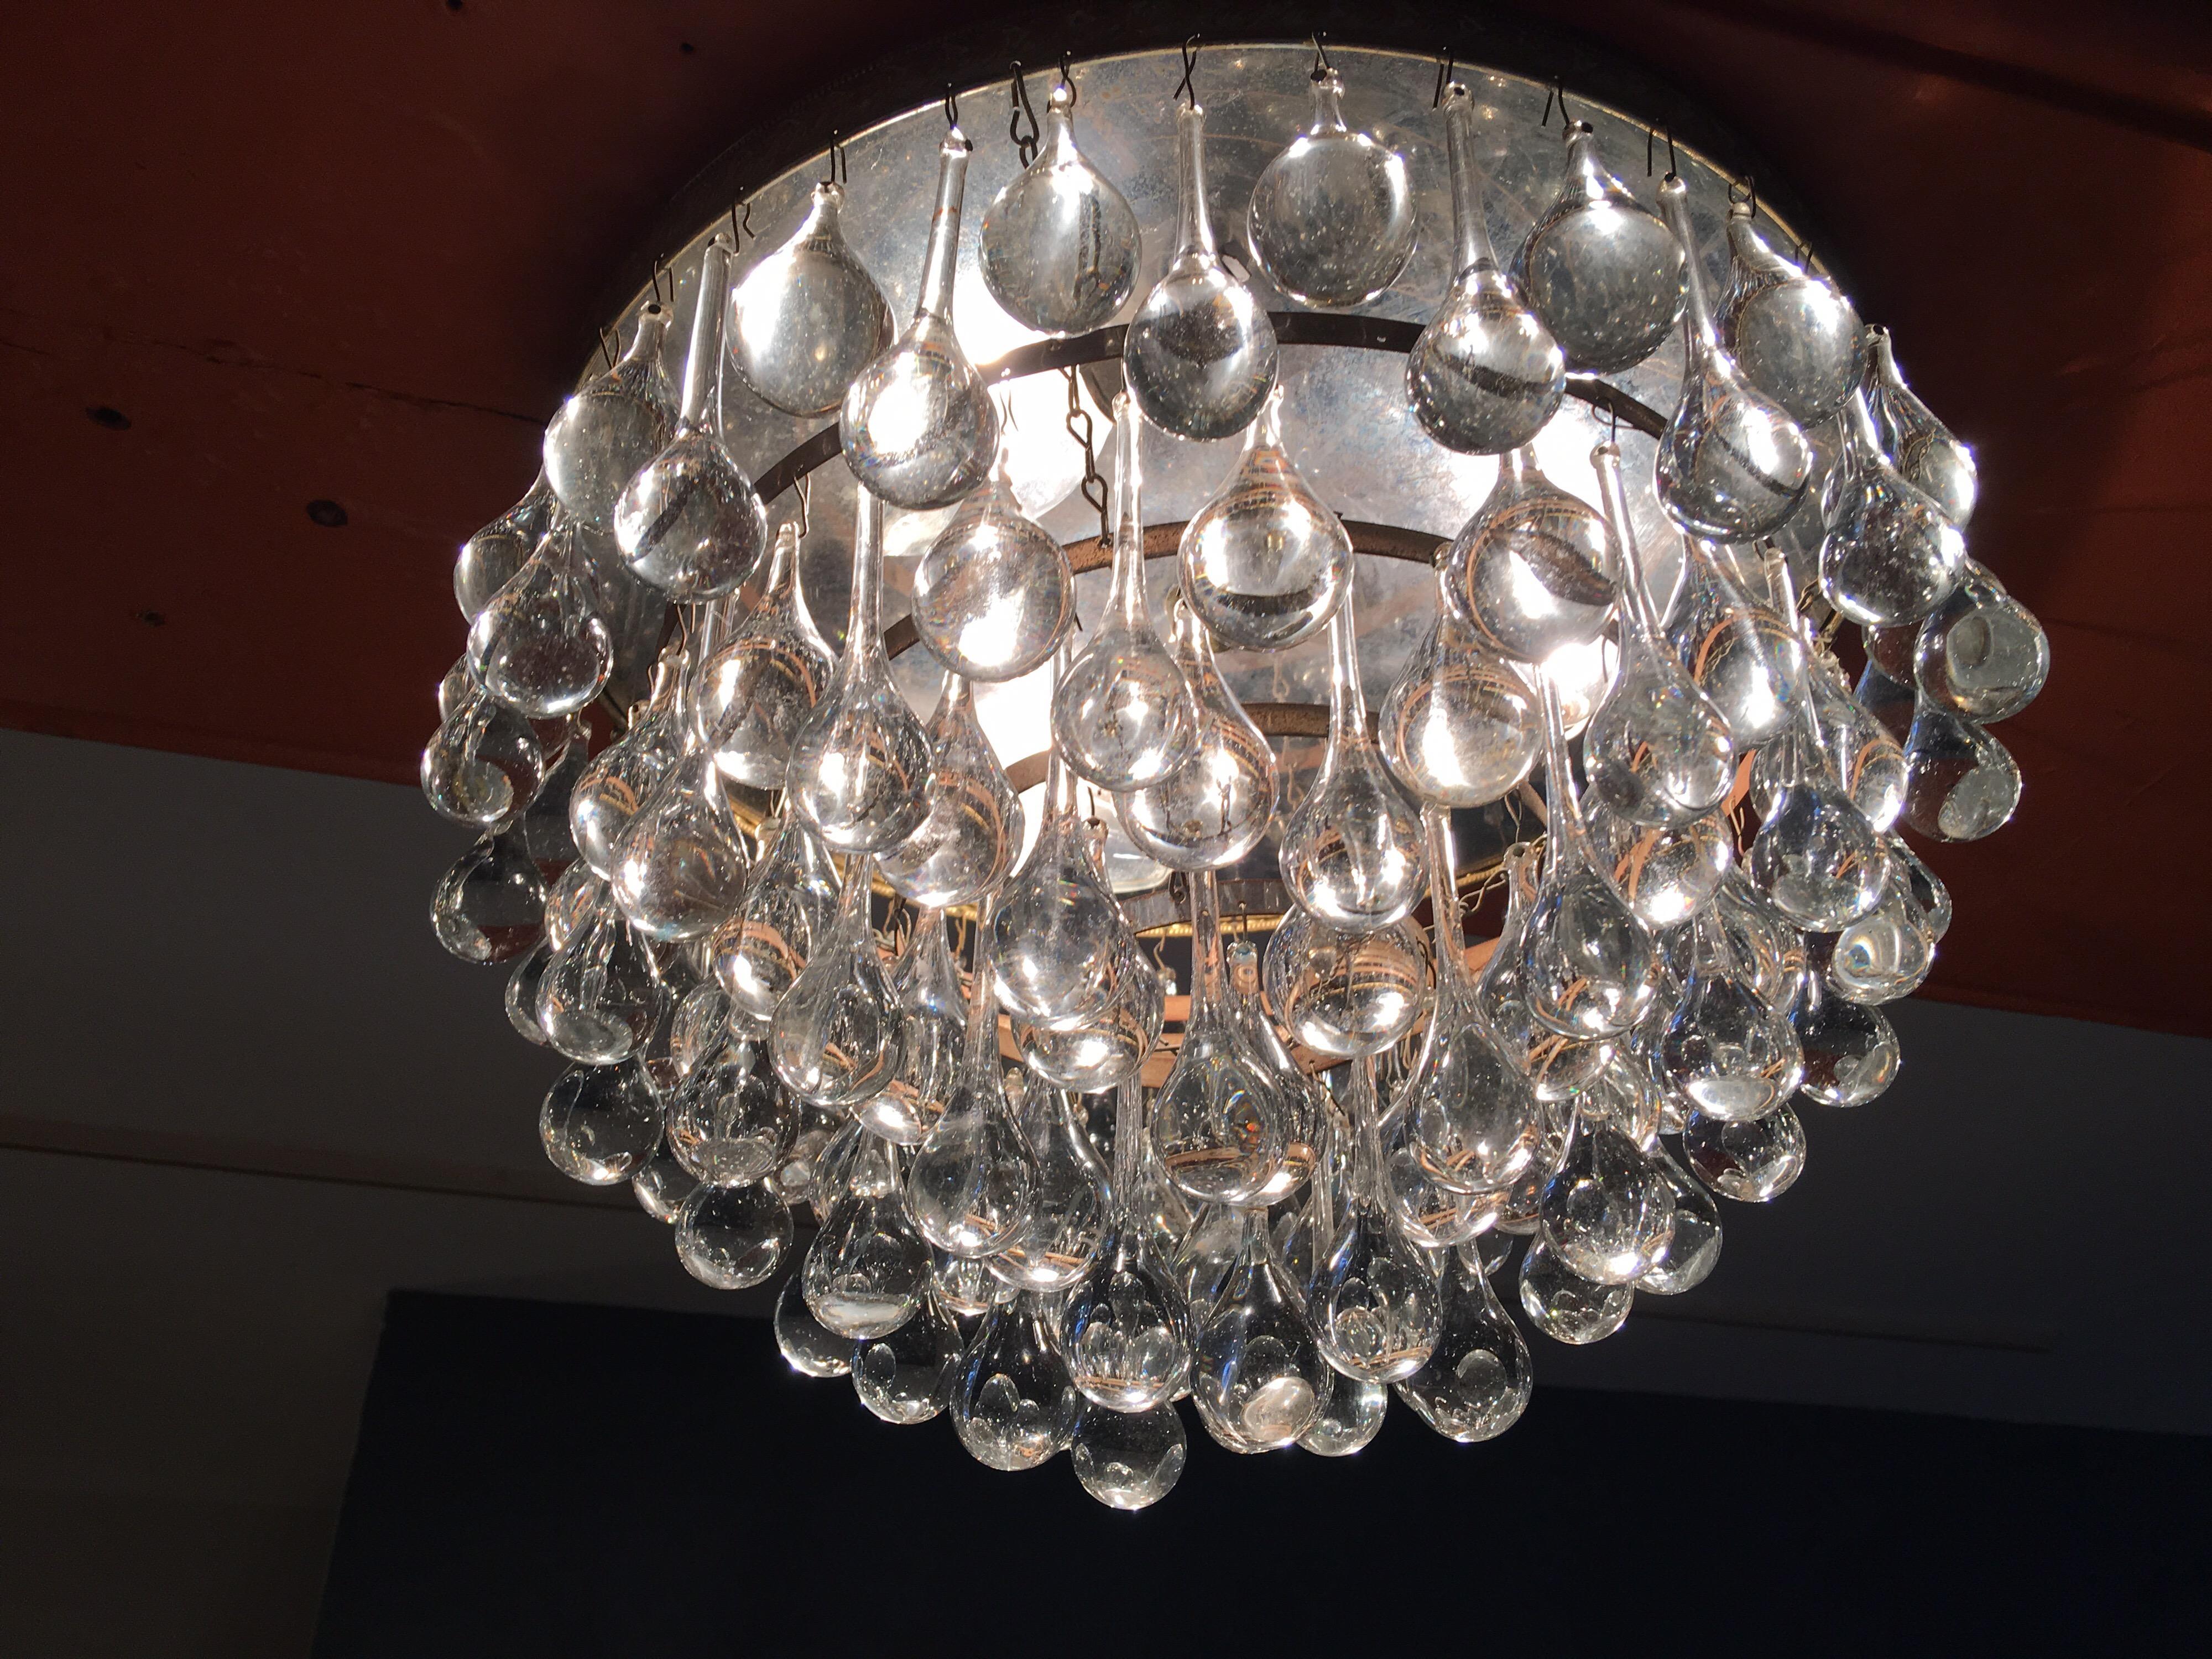 Beautiful, round chandelier with 2 types of glass crystals. Crystals alternate around rim, large and small. 3 sockets with 8 tiers of crystals. Beautiful presence!